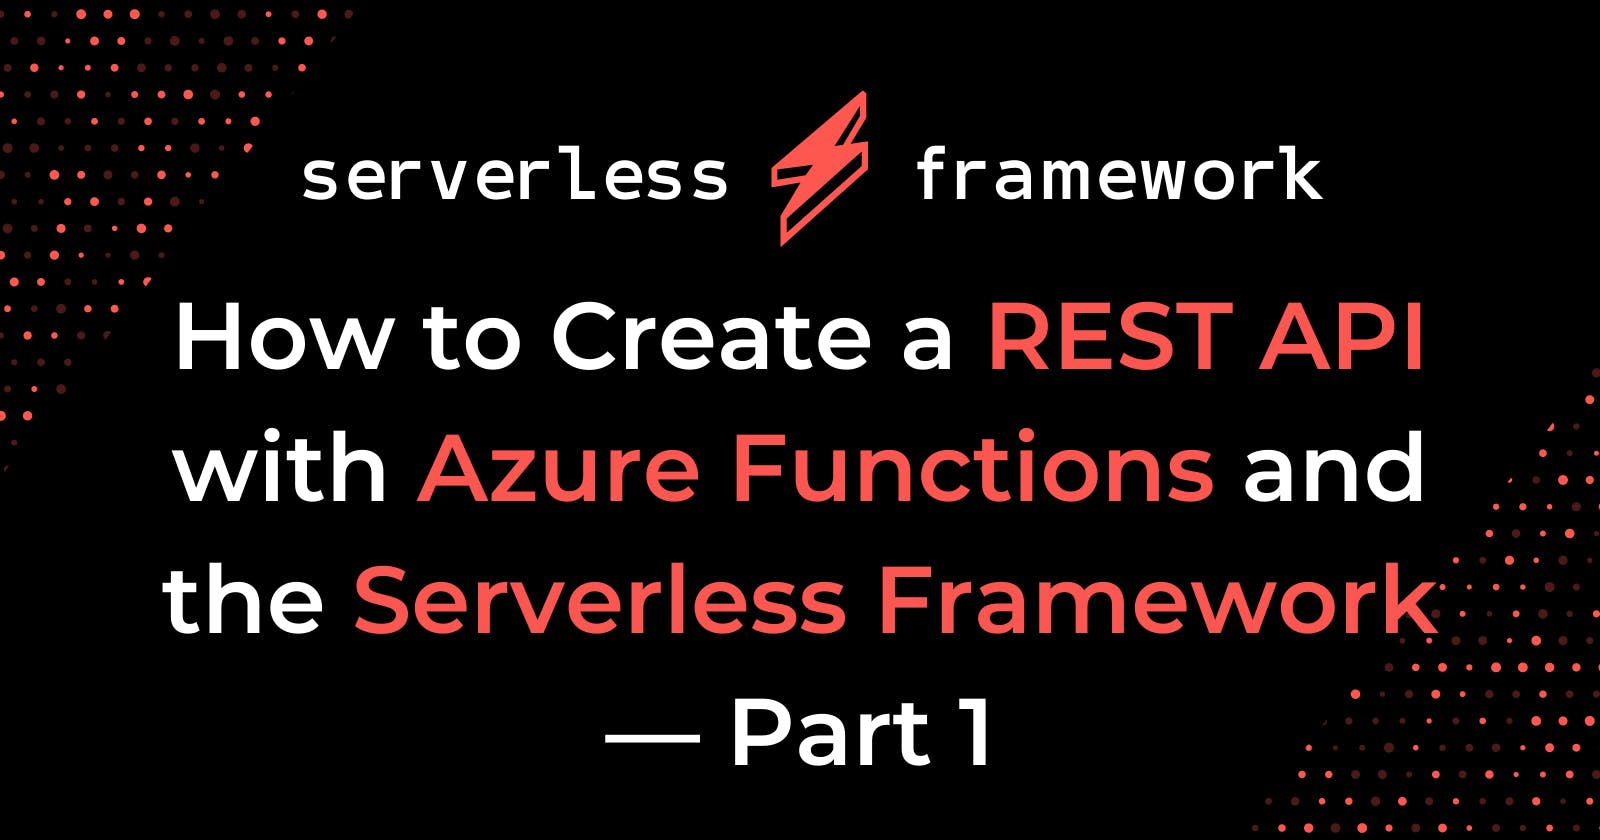 How to Create a REST API with Azure Functions and the Serverless Framework — Part 1